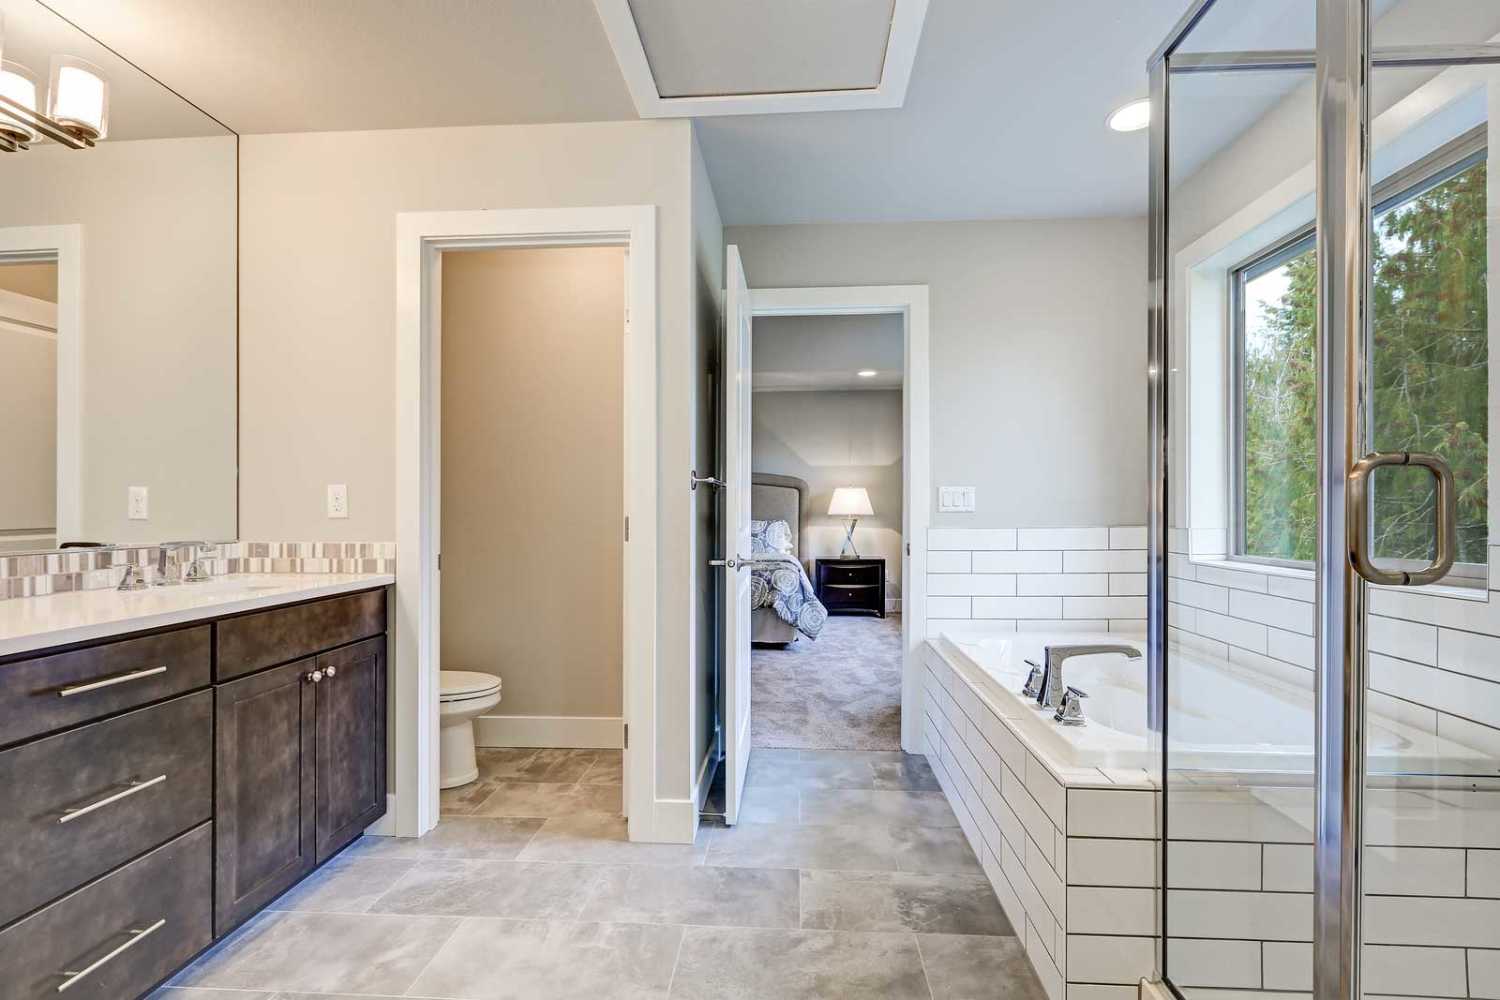 How Much Is the Average Cost of a Bathroom Remodel? The ...